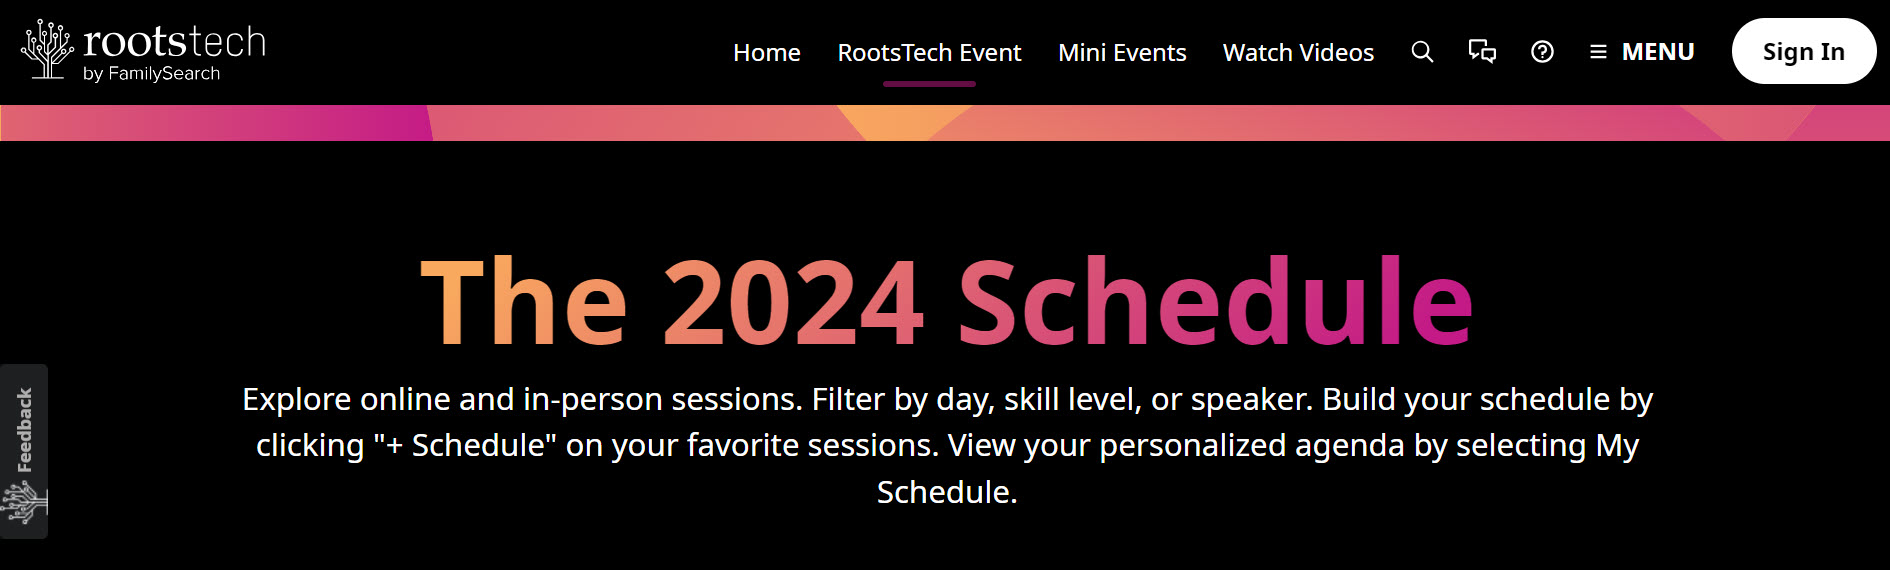 RootsTech 2024 Class Schedule Now Available - REGISTER TODAY!